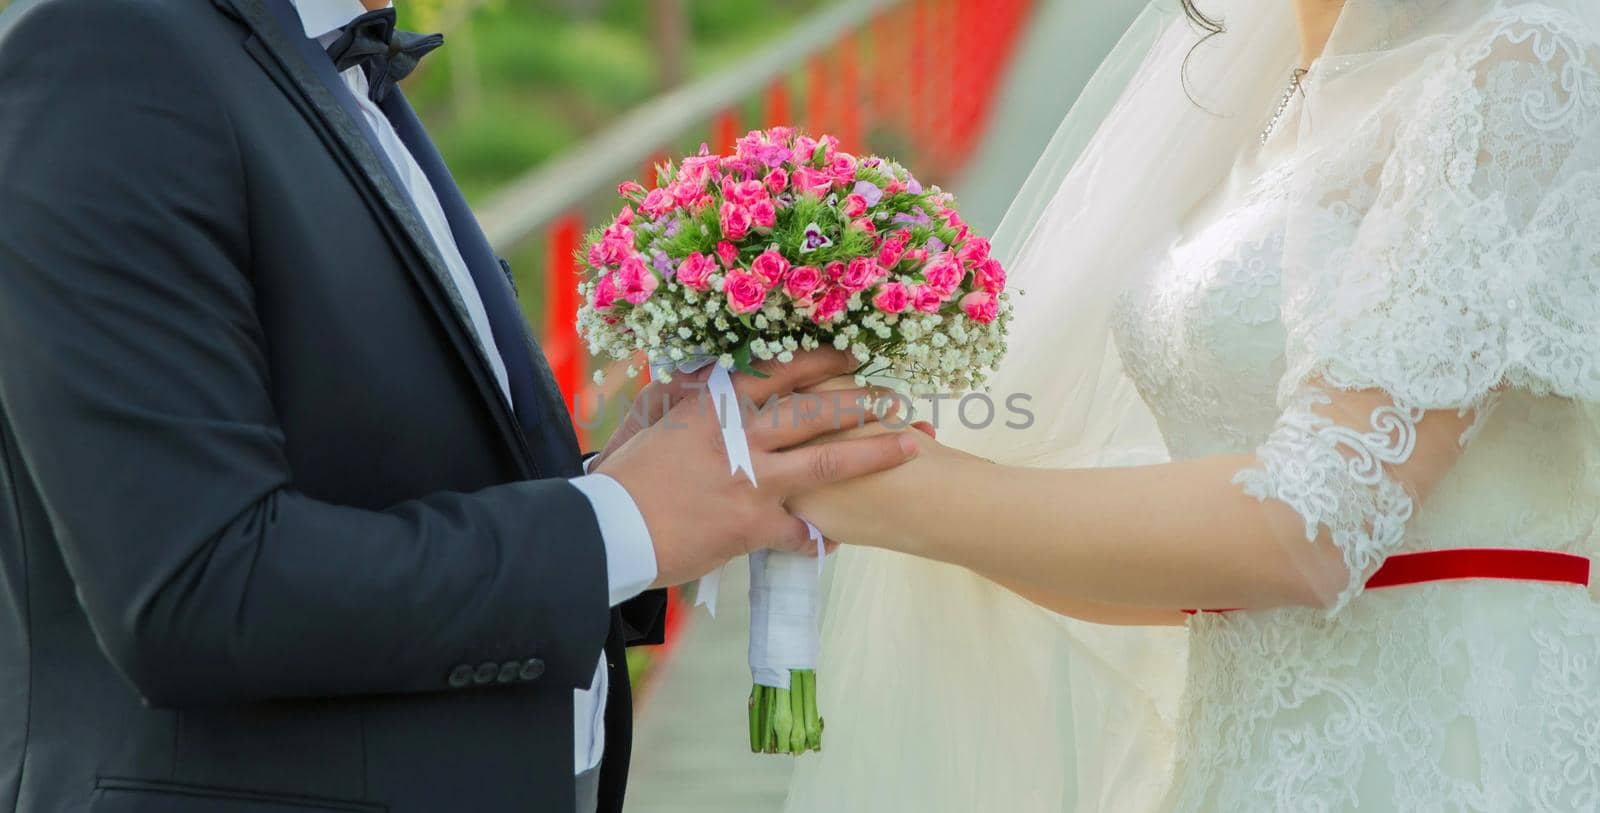 Hands folded behind their back, hold a beautiful little wedding bouquet of roses . They held the pink flower bouquet in their hands